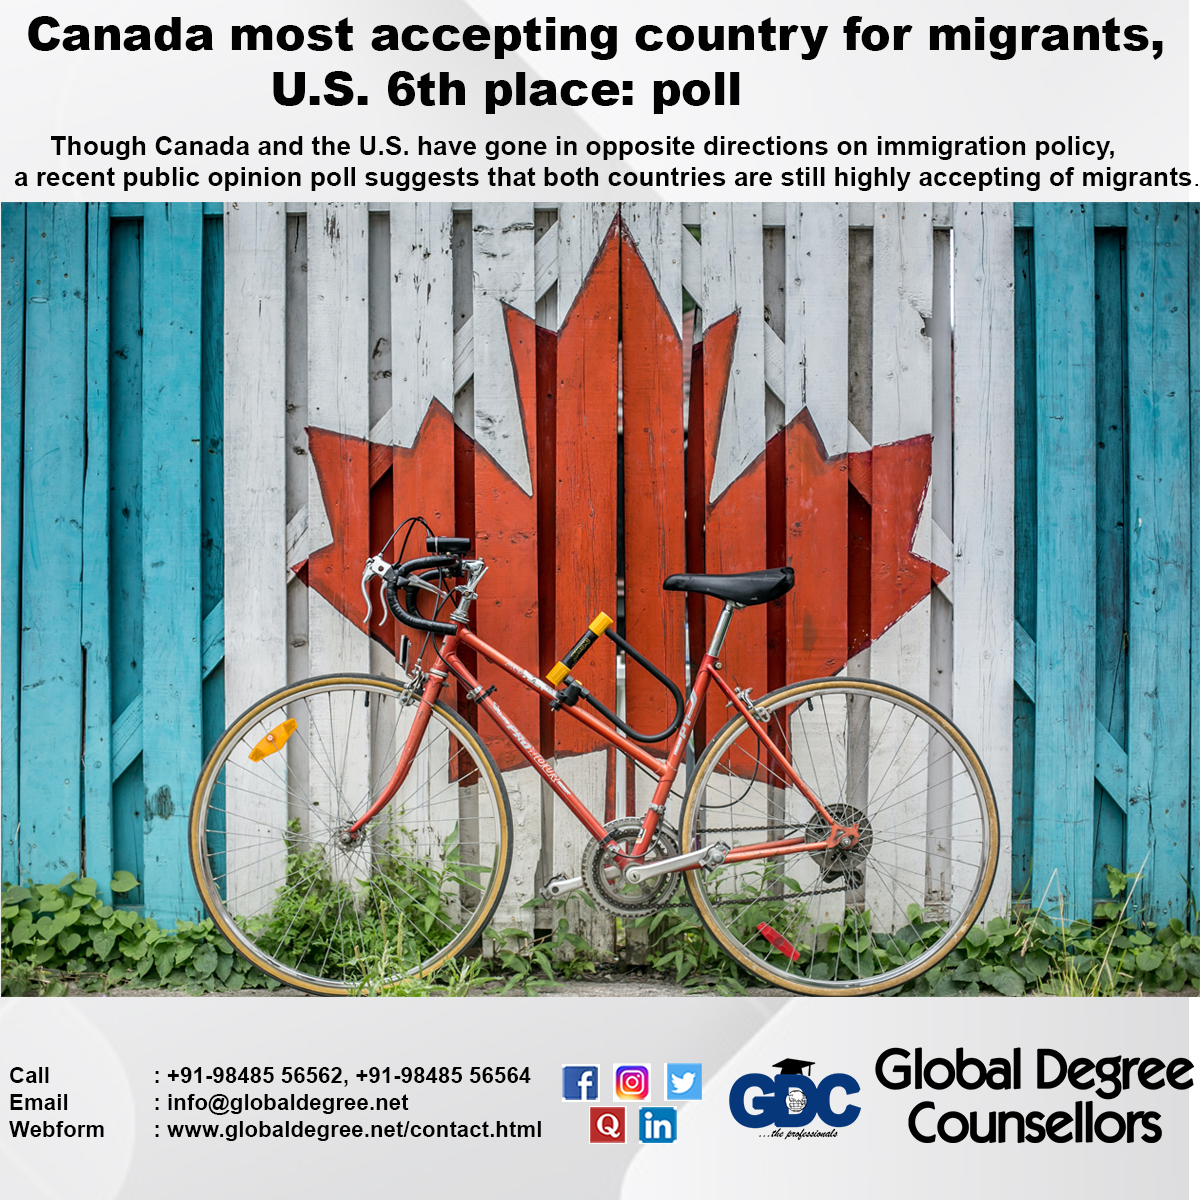 Canada Most Accepting Country for Migrants, U.S. 6th Place: Poll